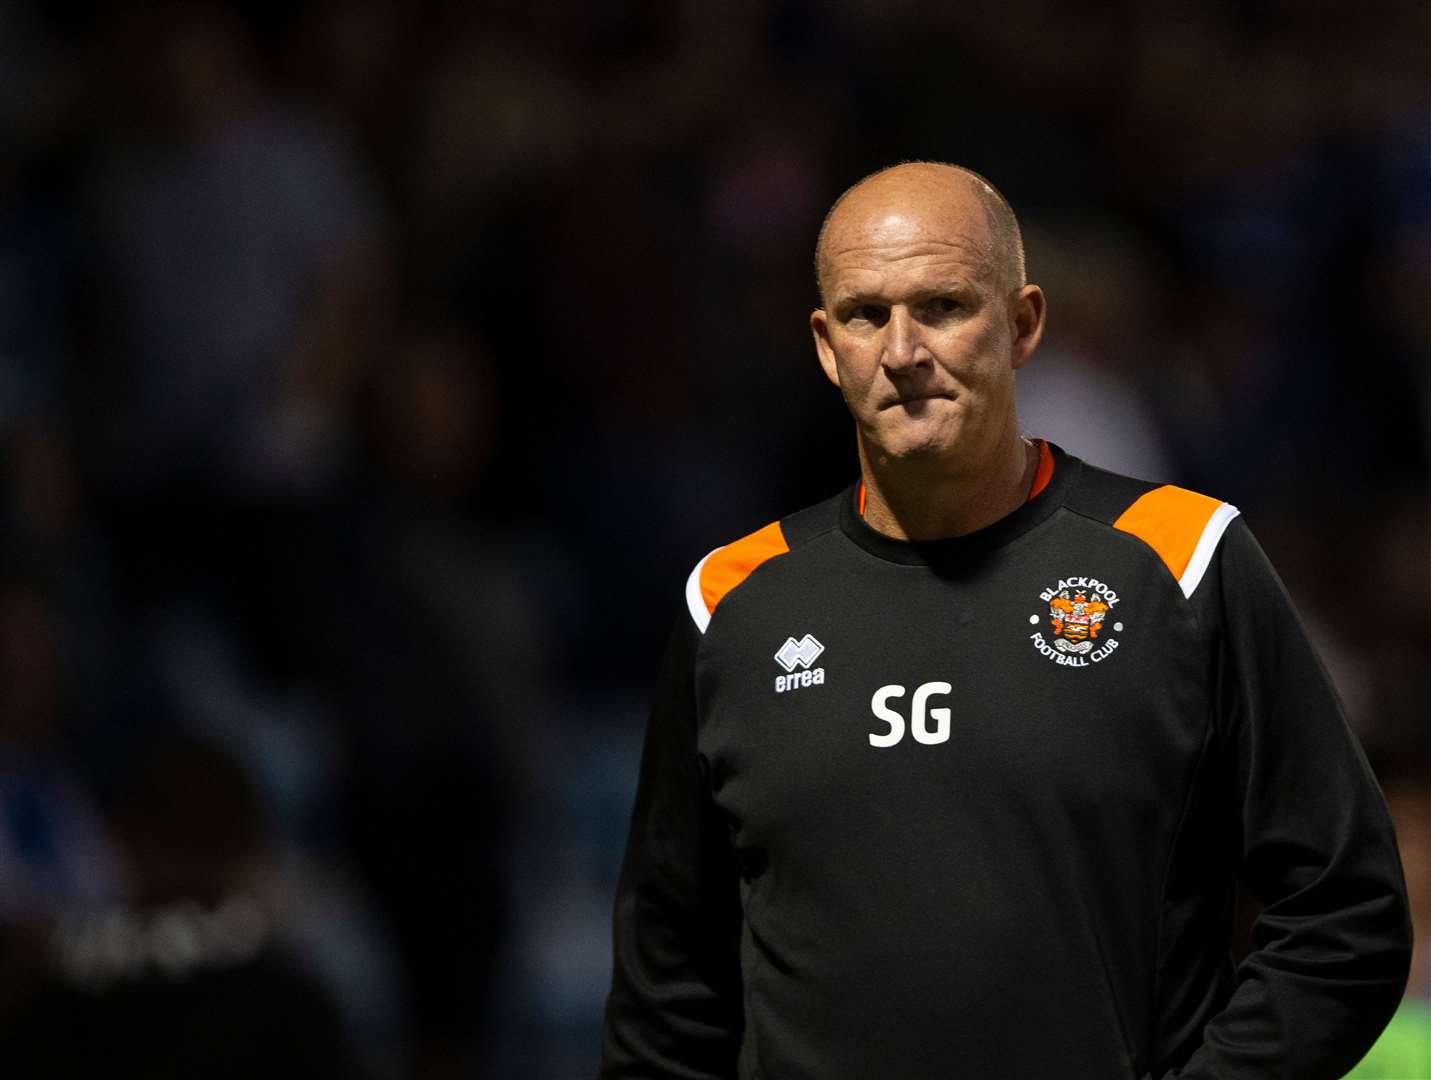 Blackpool manager Simon Grayson hasn't managed to replicate his previous success with the Seasiders